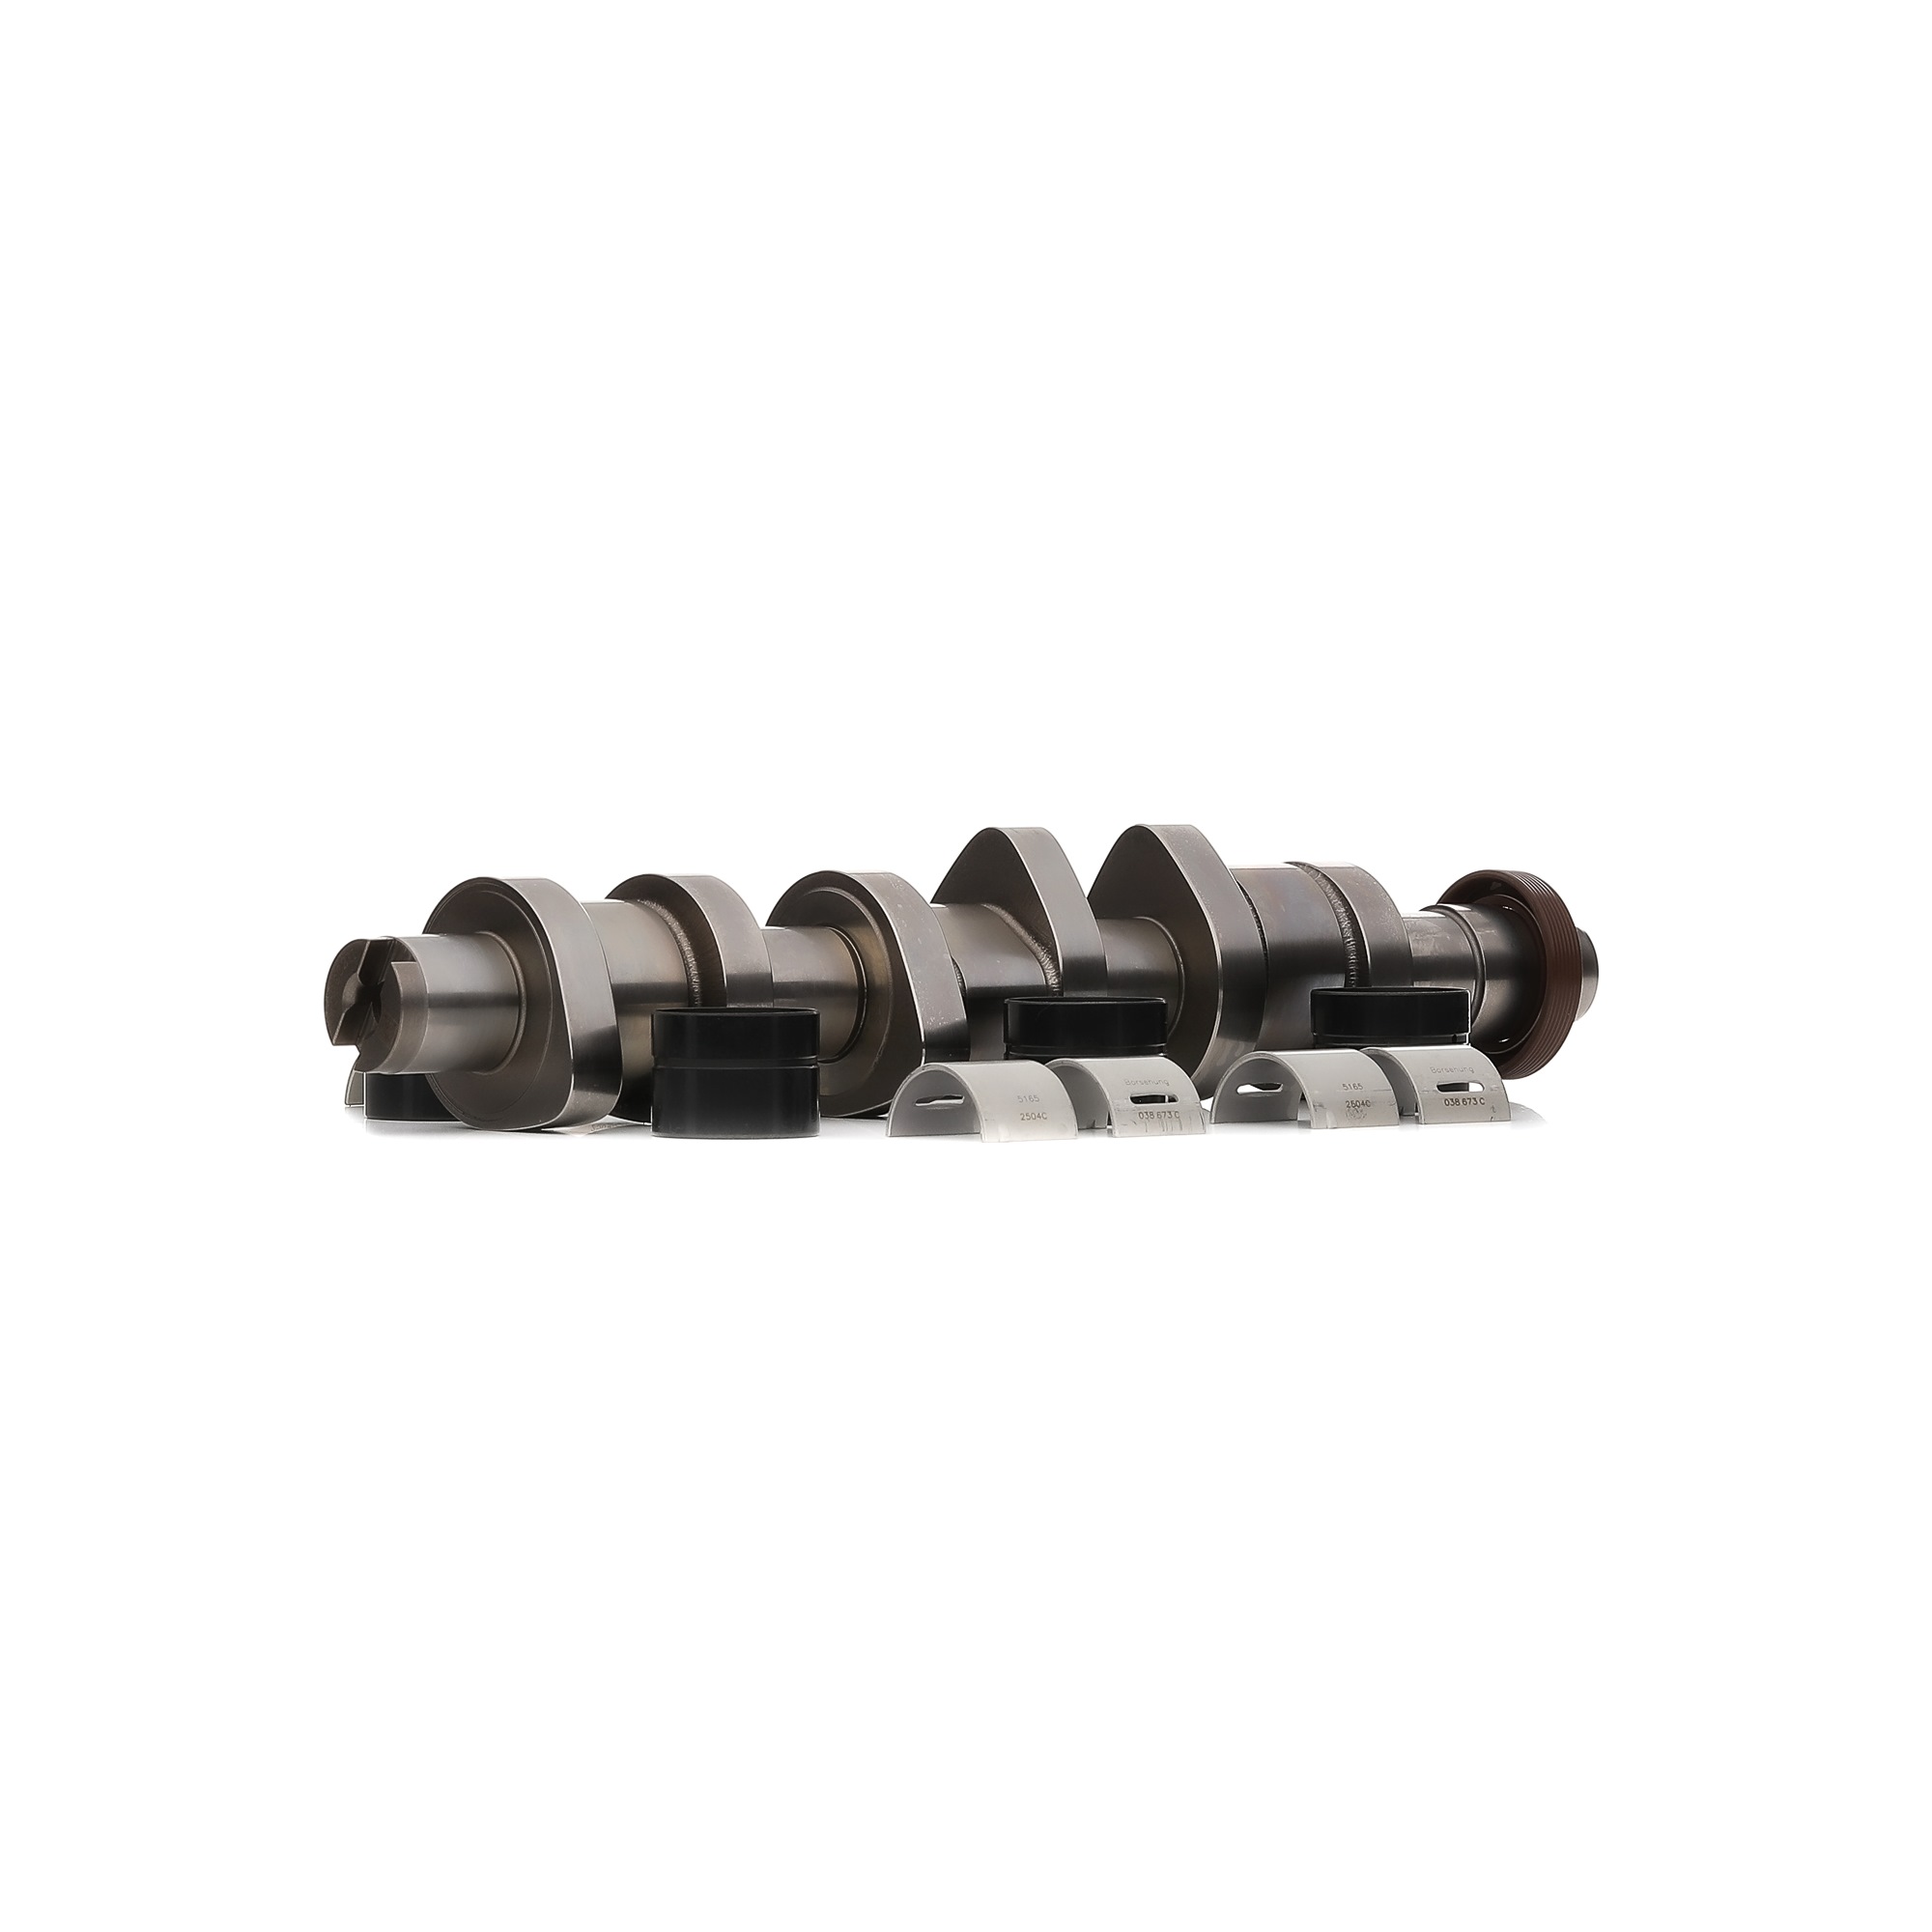 Borsehung without valves Camshaft Kit B18665 buy